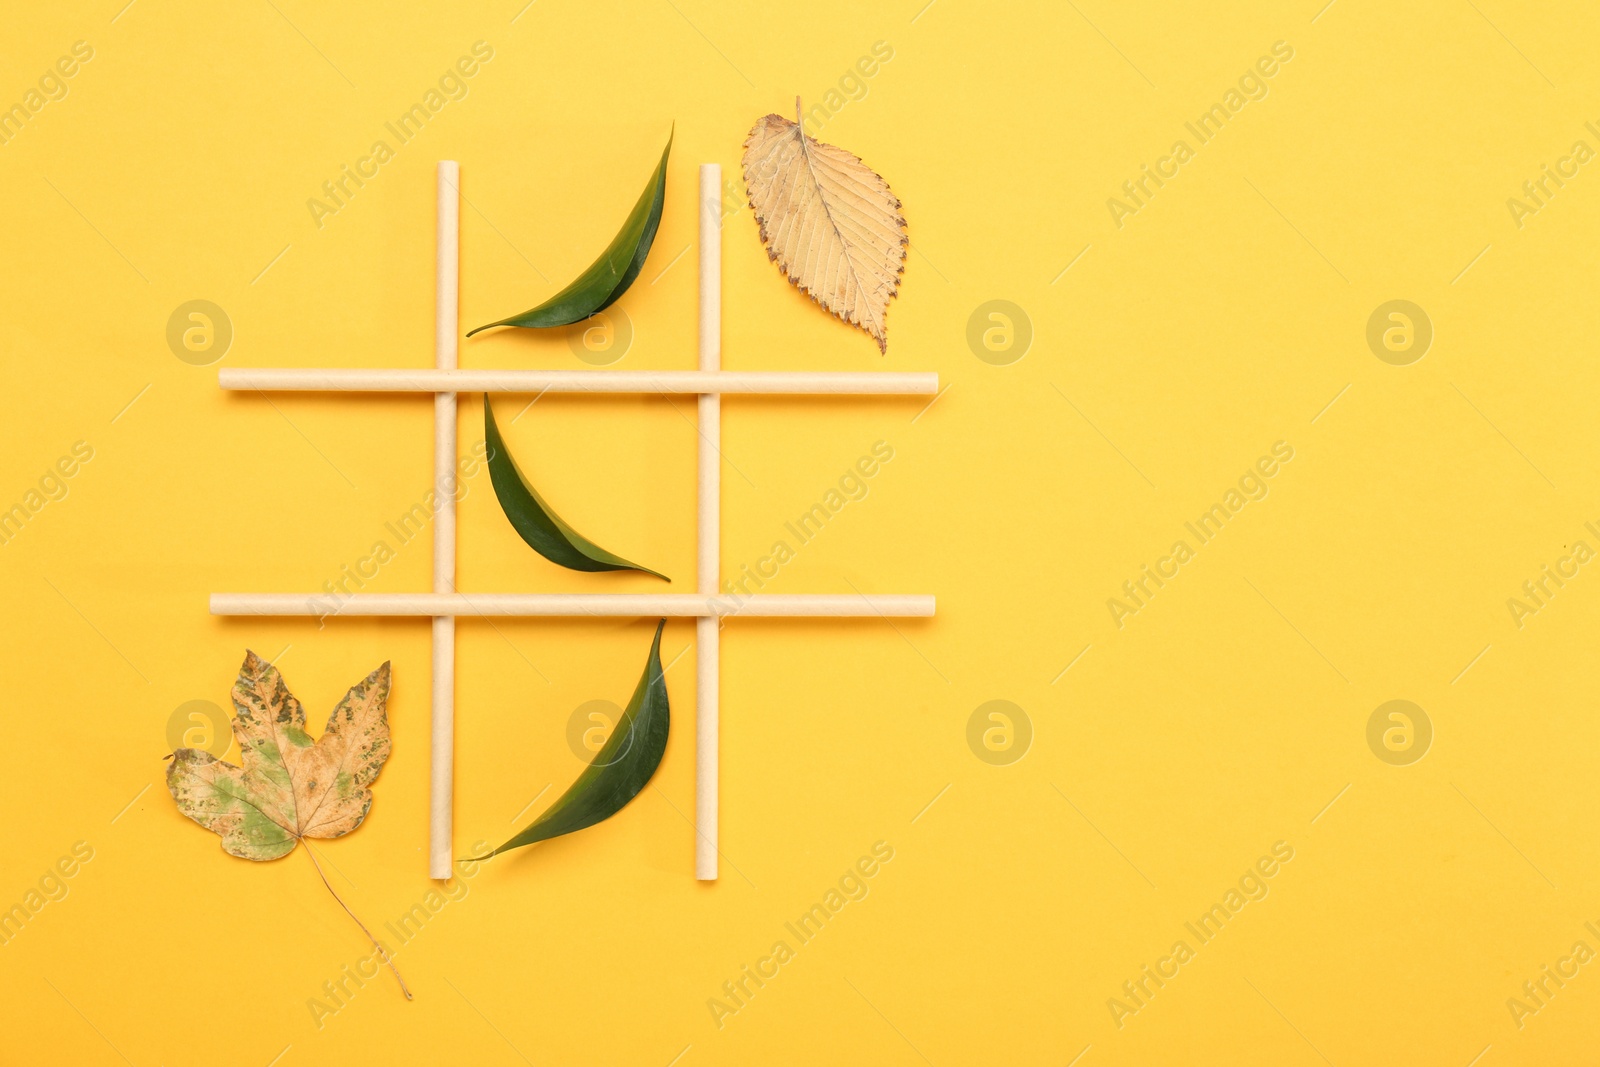 Photo of Tic tac toe game made with fresh and dry leaves on yellow background, top view. Space for text